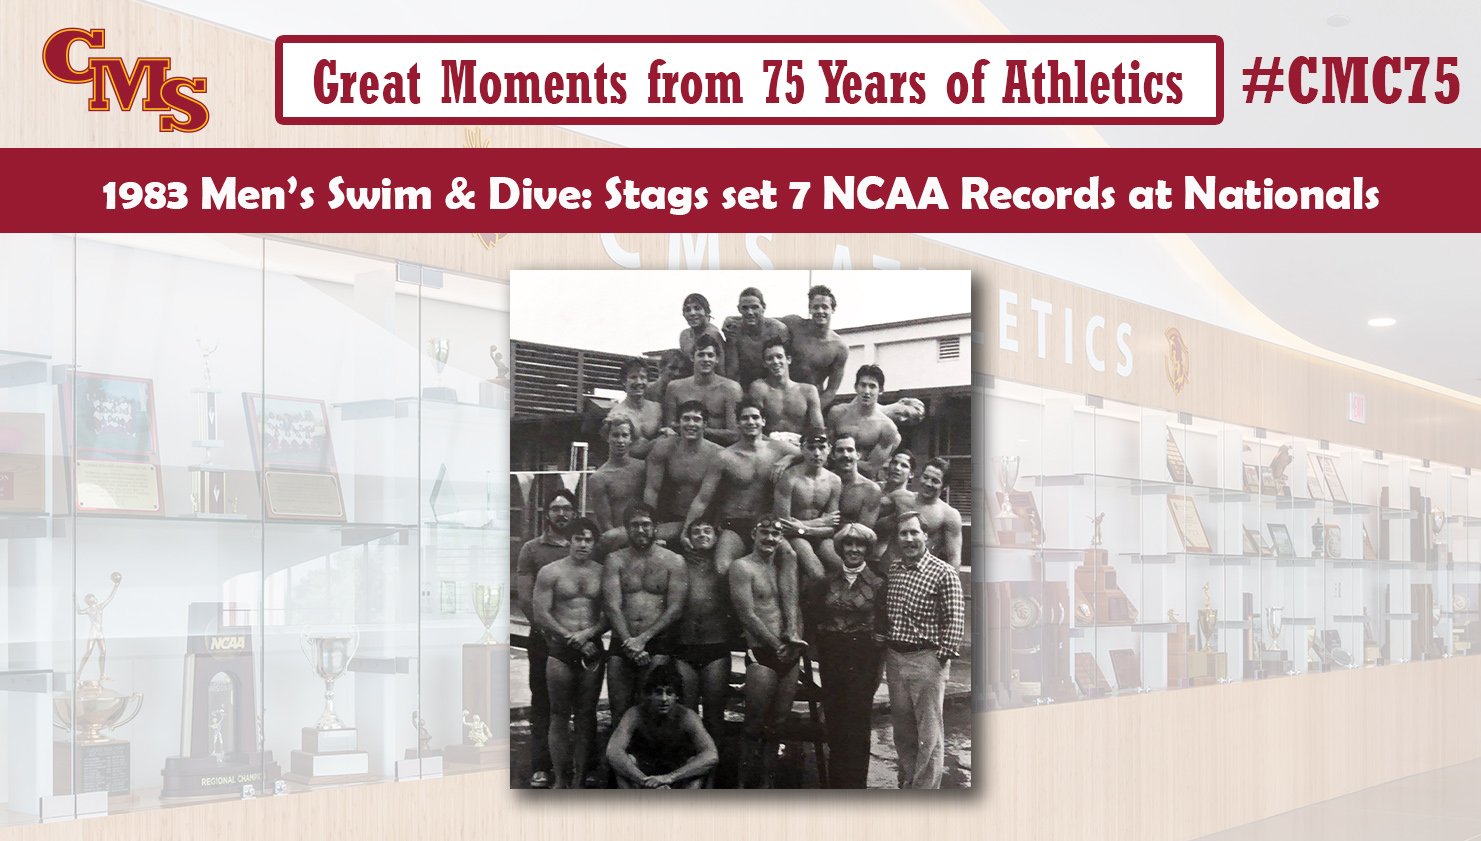 1983 Men's Swim and Dive team shot. Words over the photo read: Great Moments from 75 Years of Athletics. 1983 Men's Swim and Dive: Stags set 7 NCAA Records at Nationals